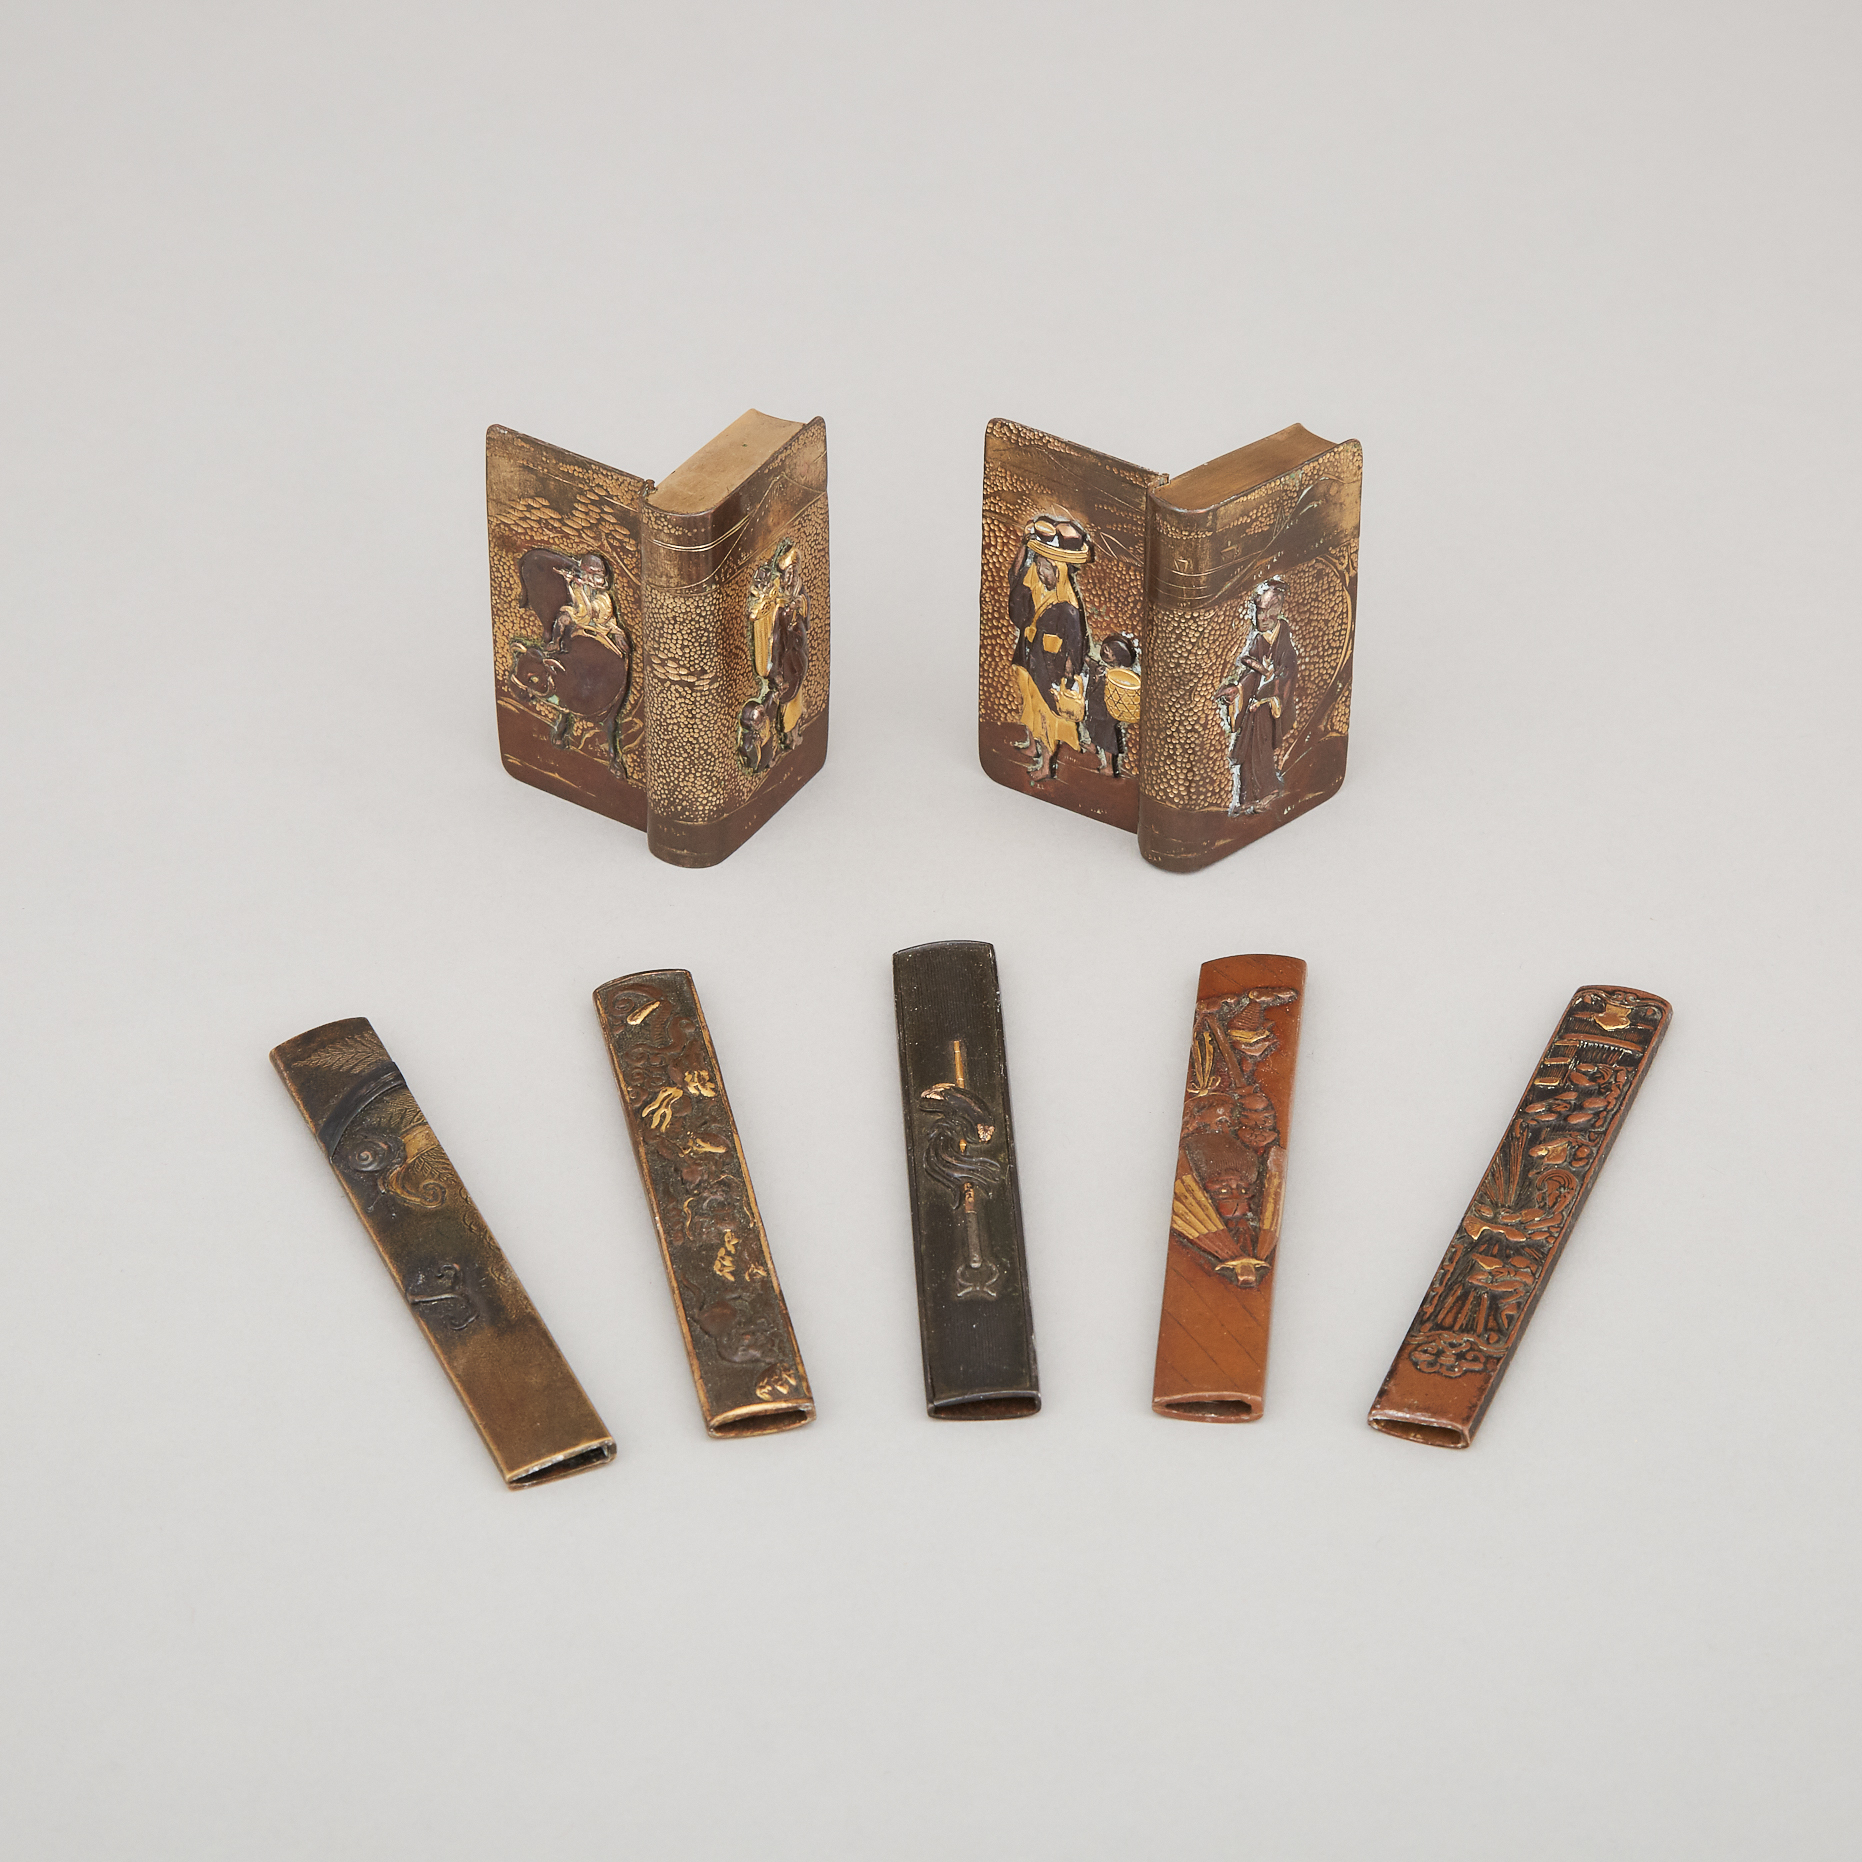 A Group of Seven Japanese Inlaid Mixed Metal Items, Meiji Period